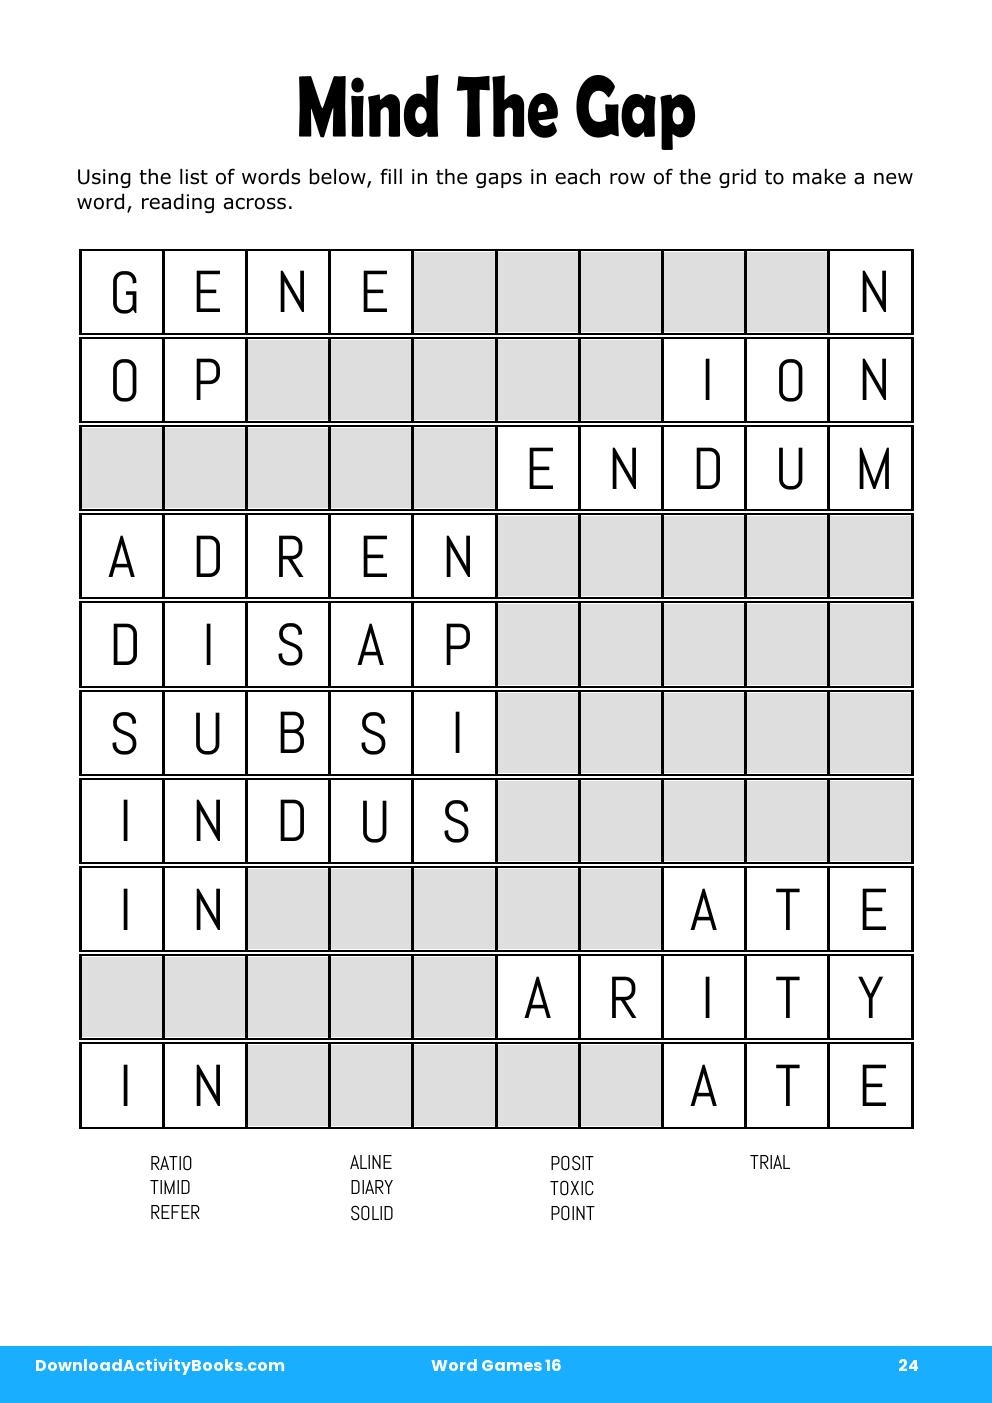 Mind The Gap in Word Games 16